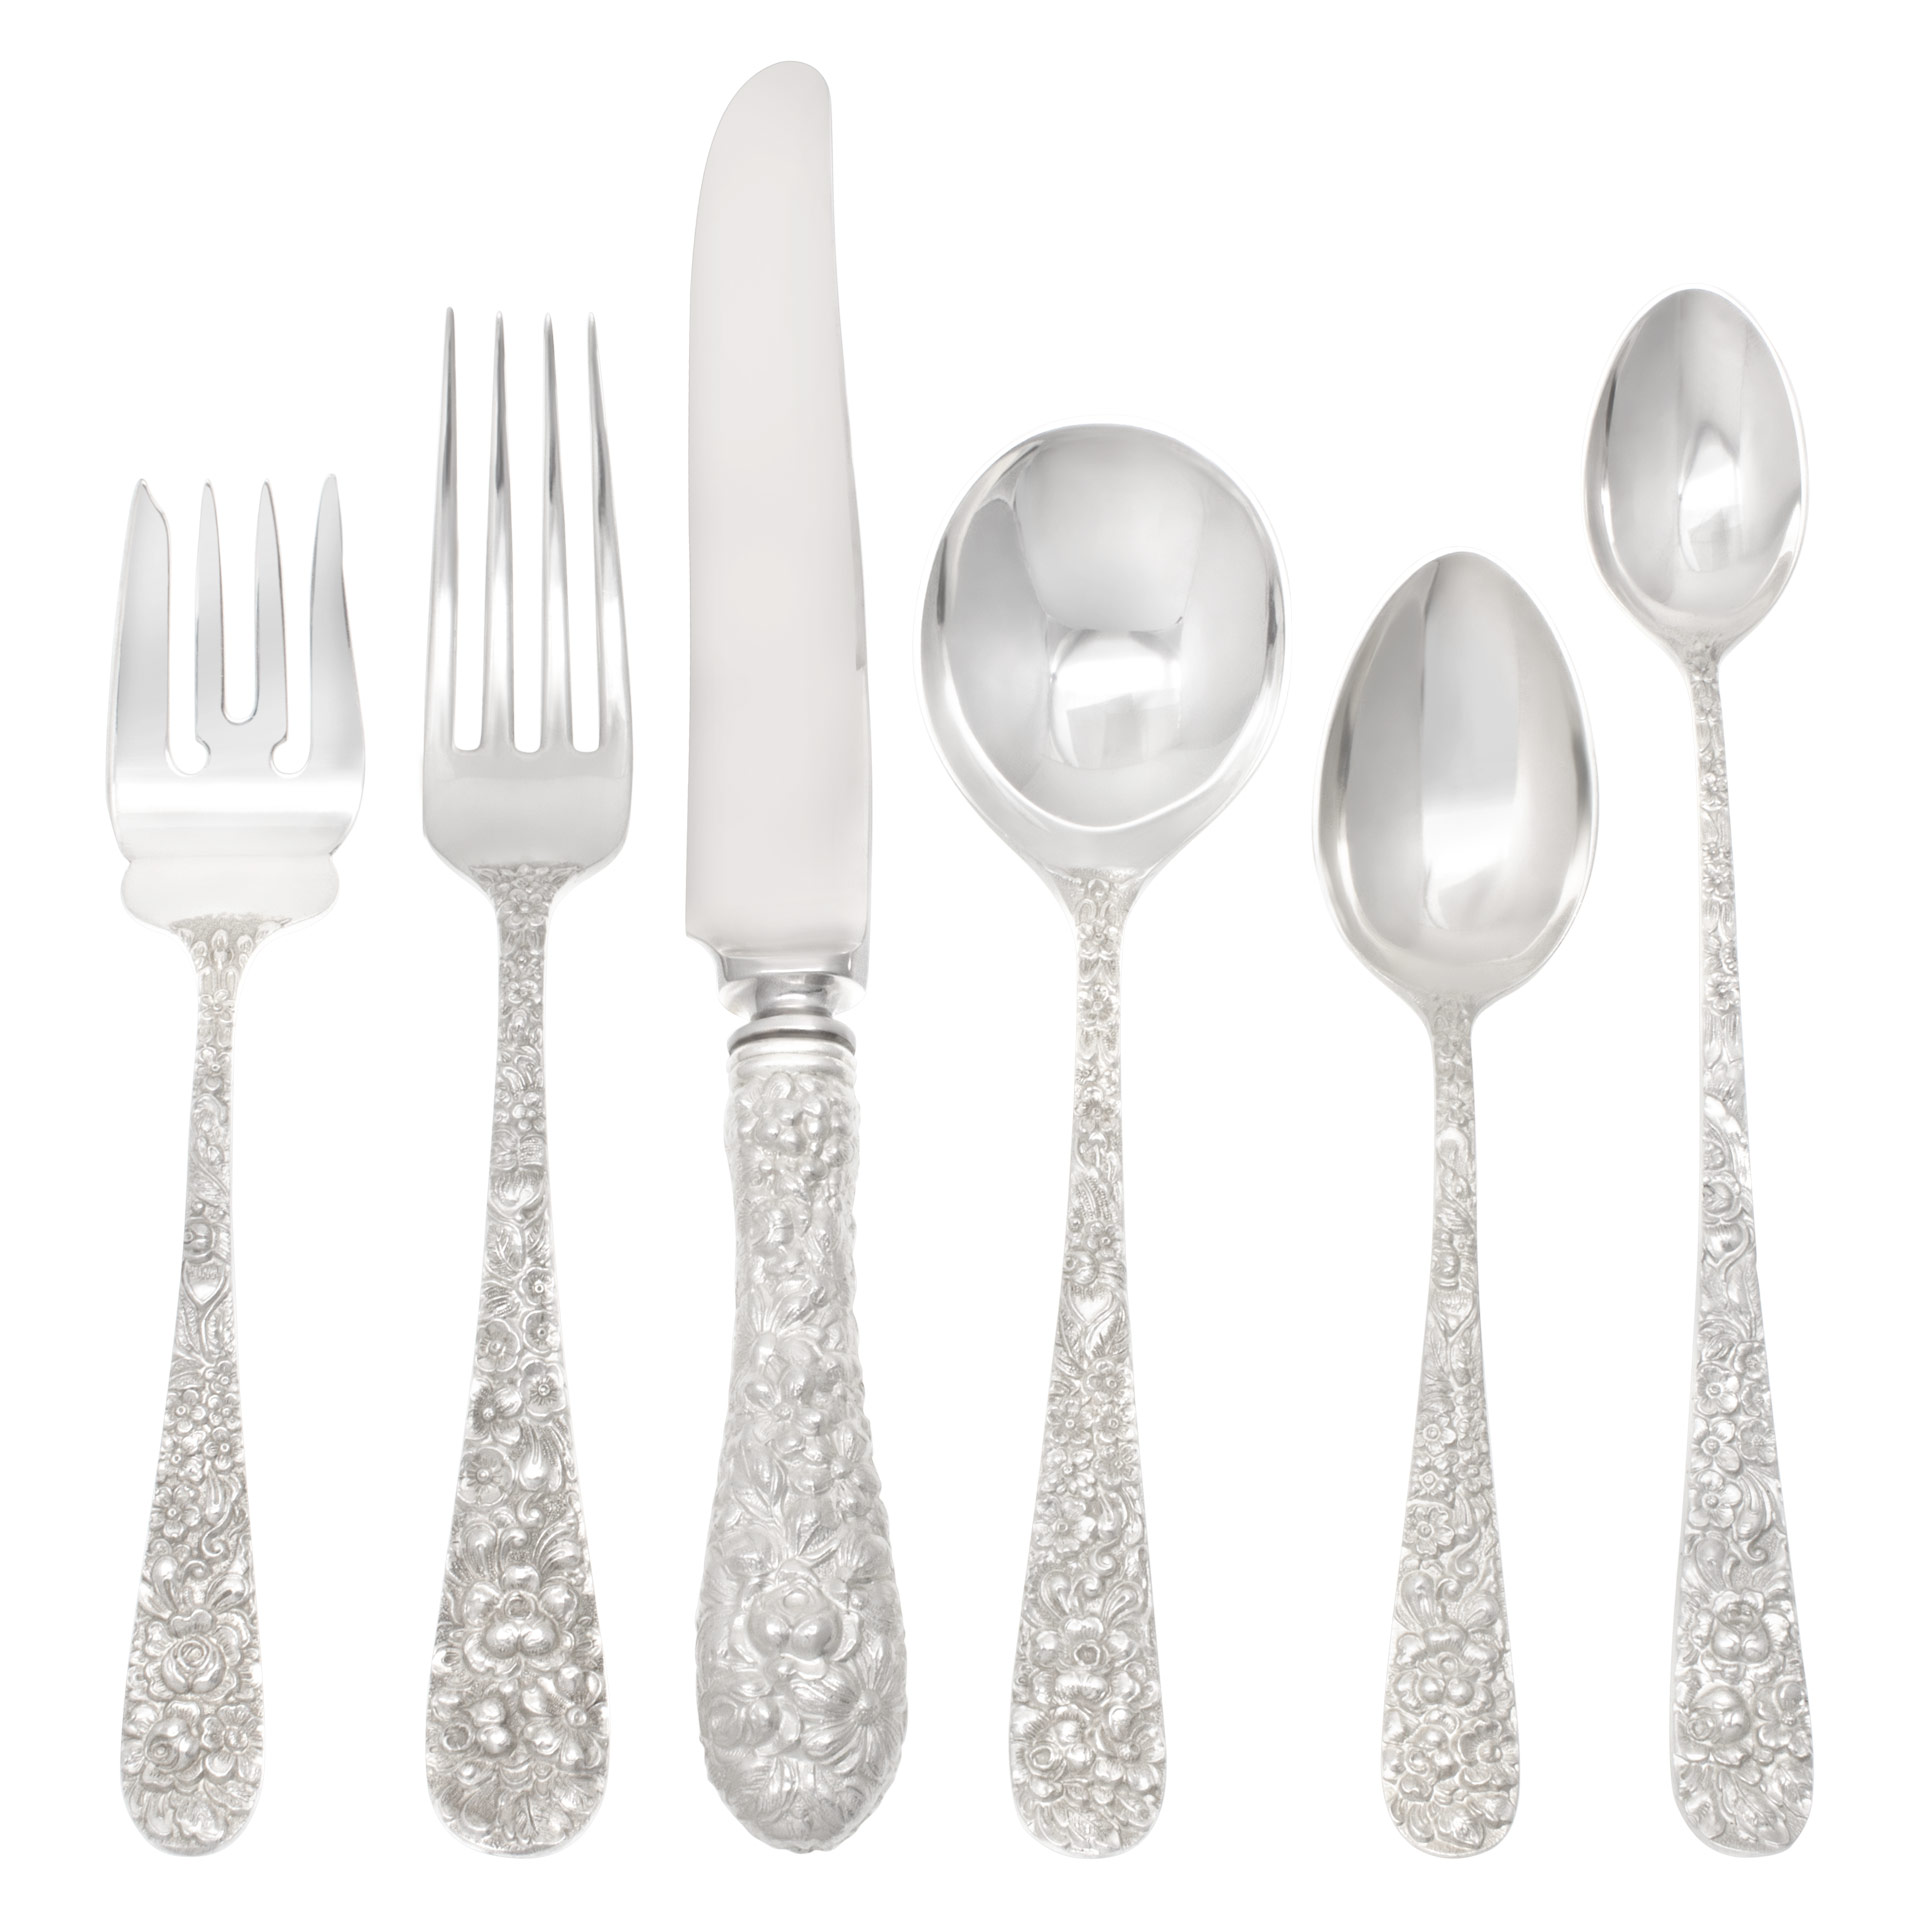 Antique "ROSE REPOUSSE" complete sterling silver flatware set patented  in 1892 by Stieff Sterling Silver Co. 6 place setting for 12 + 20 serving pieces. Over 3800 grams sterling silver. image 1